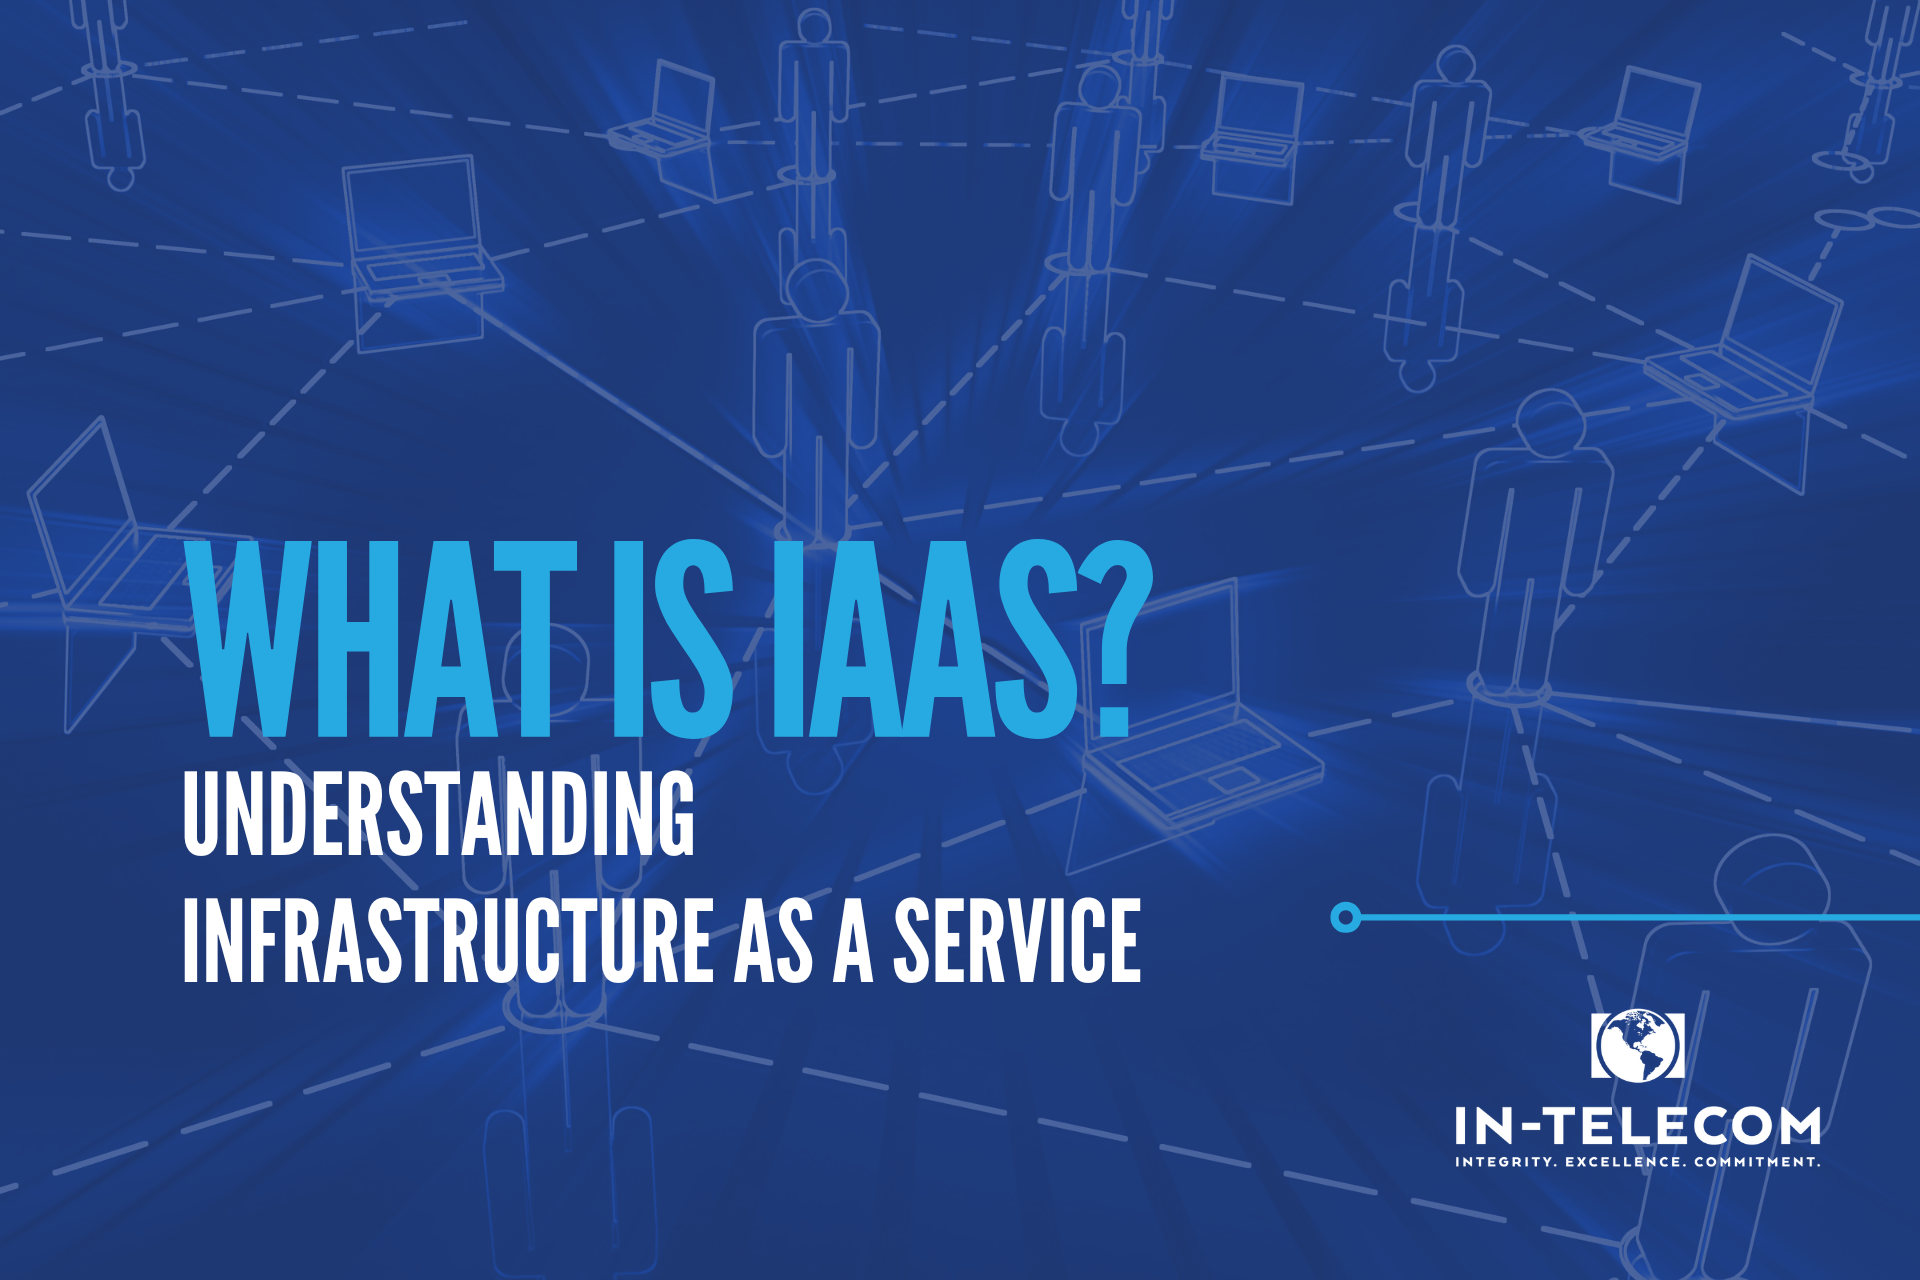 Image of a computer network with text that says "What is IaaS? Understanding Infrastructure as a service"